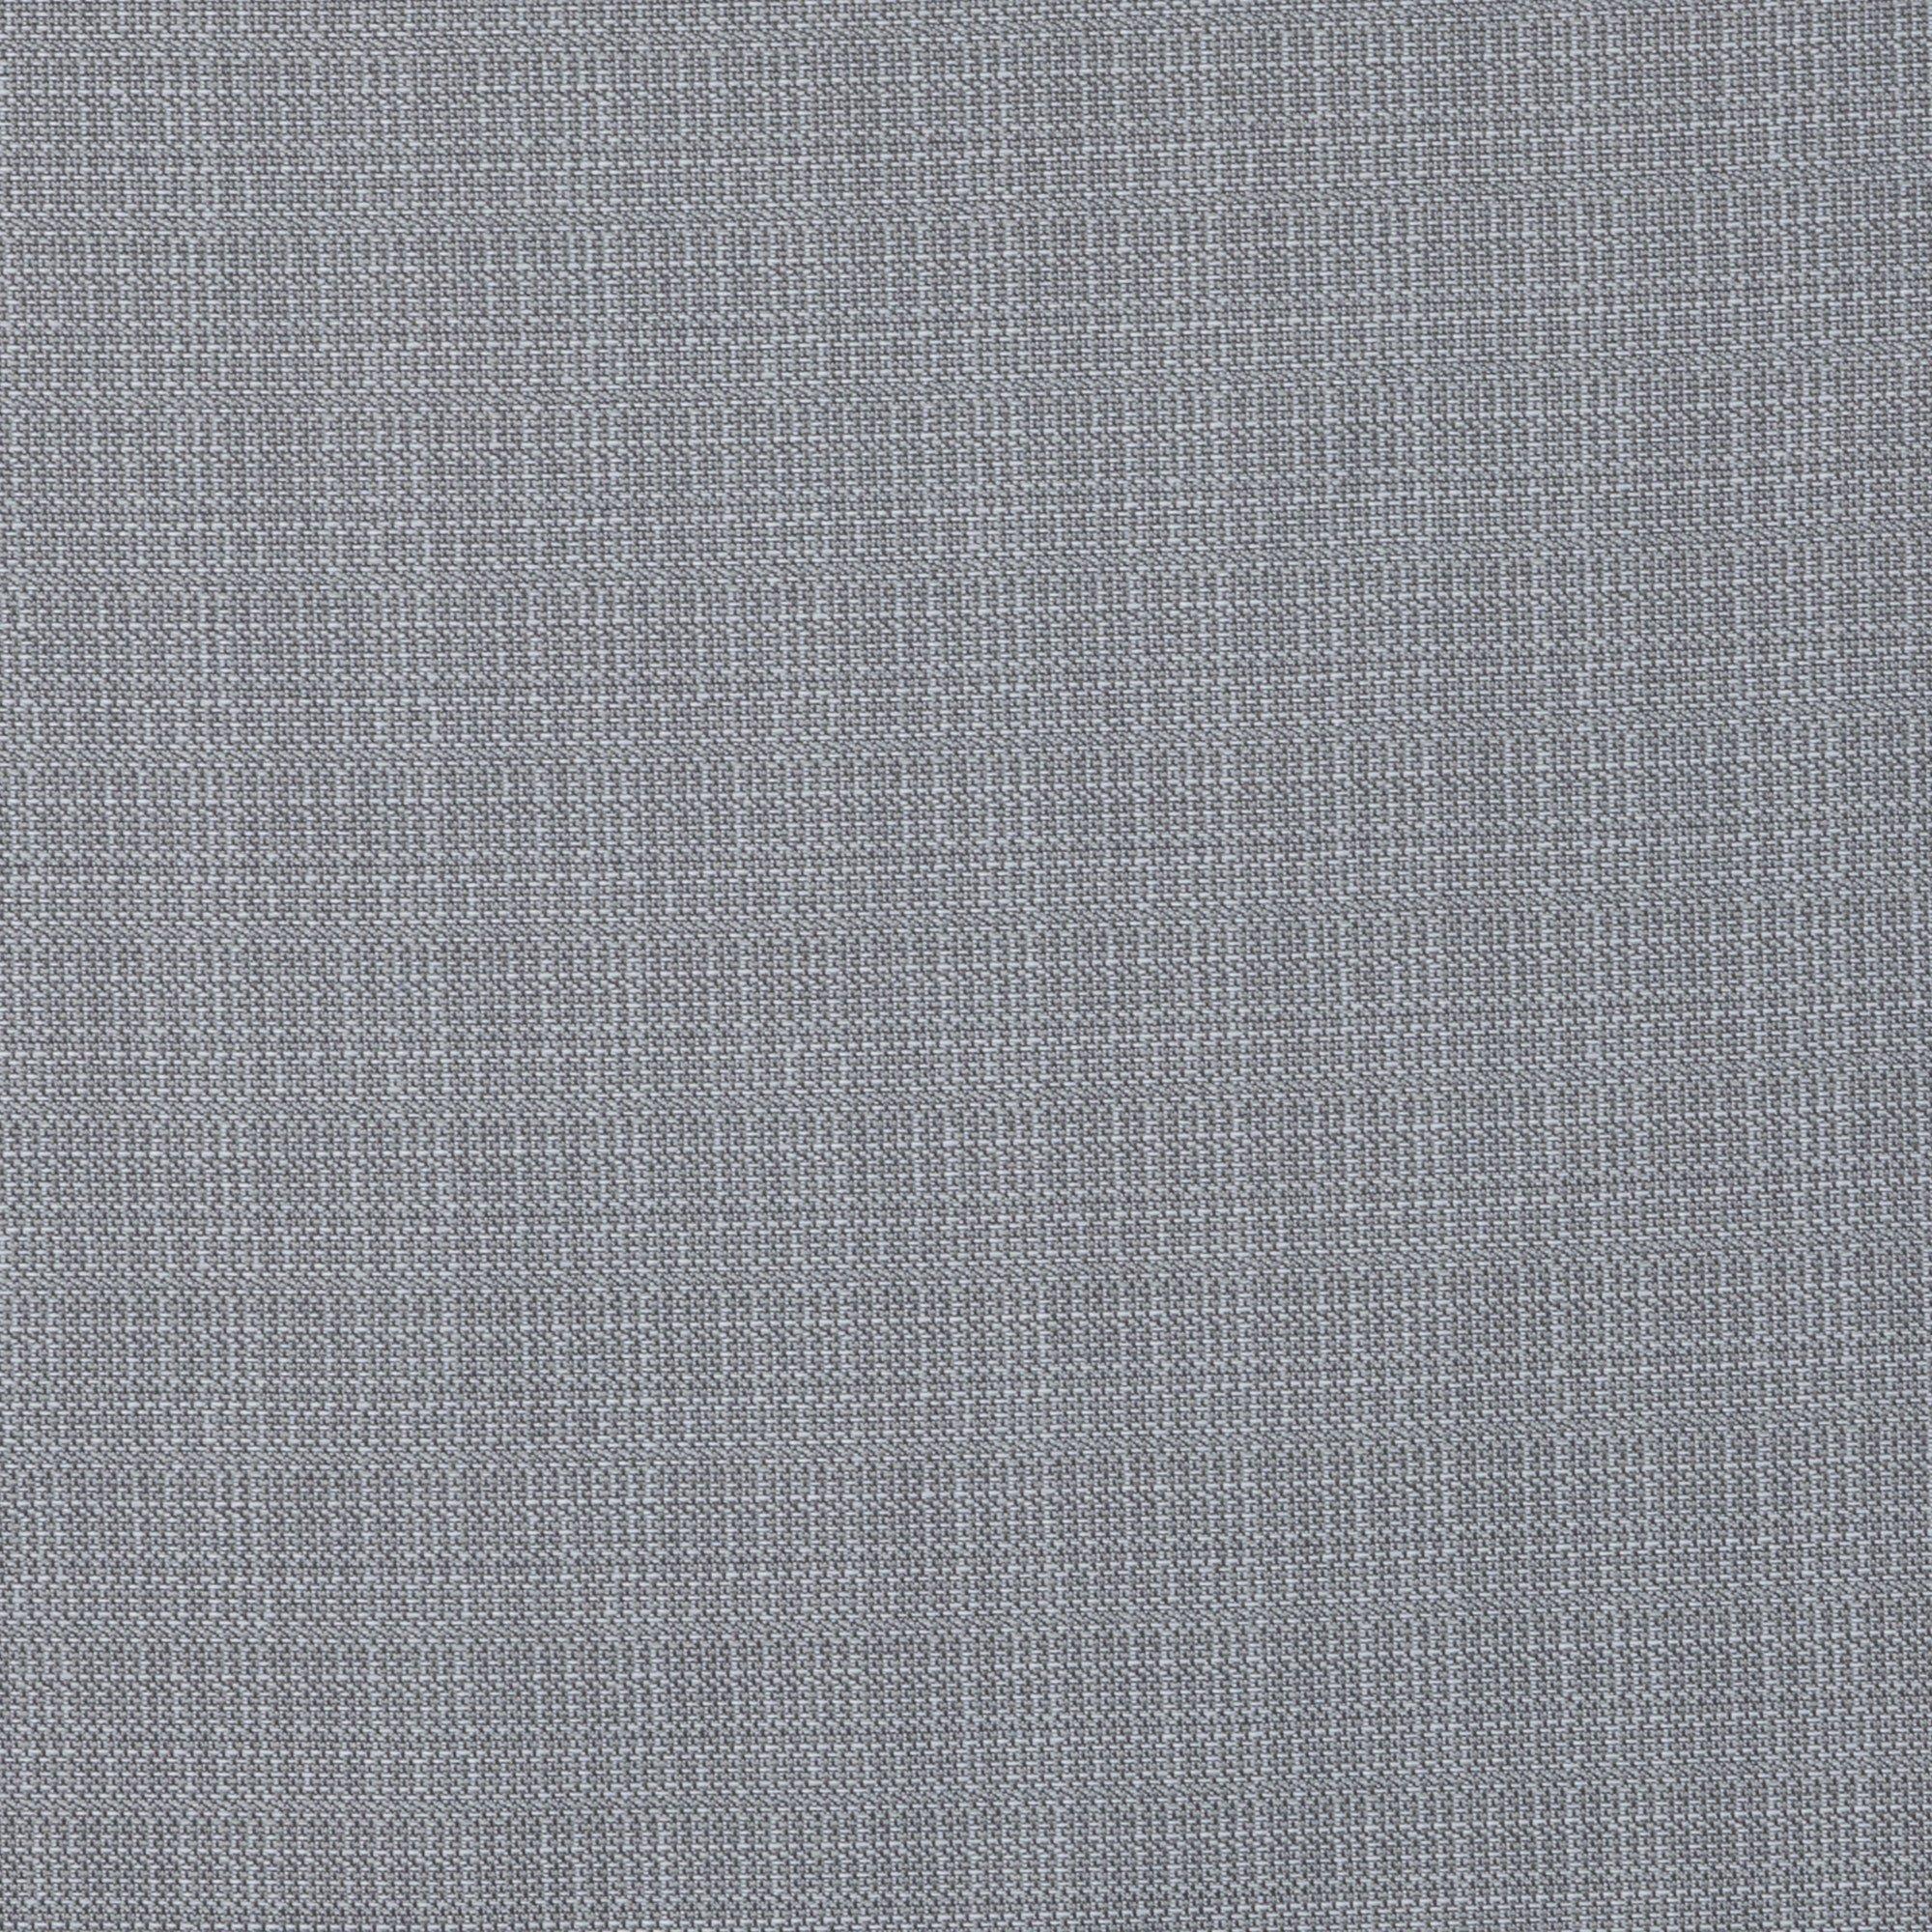 Pewter Gray Breathable Mesh Upholstery Fabric by the Yard E7580